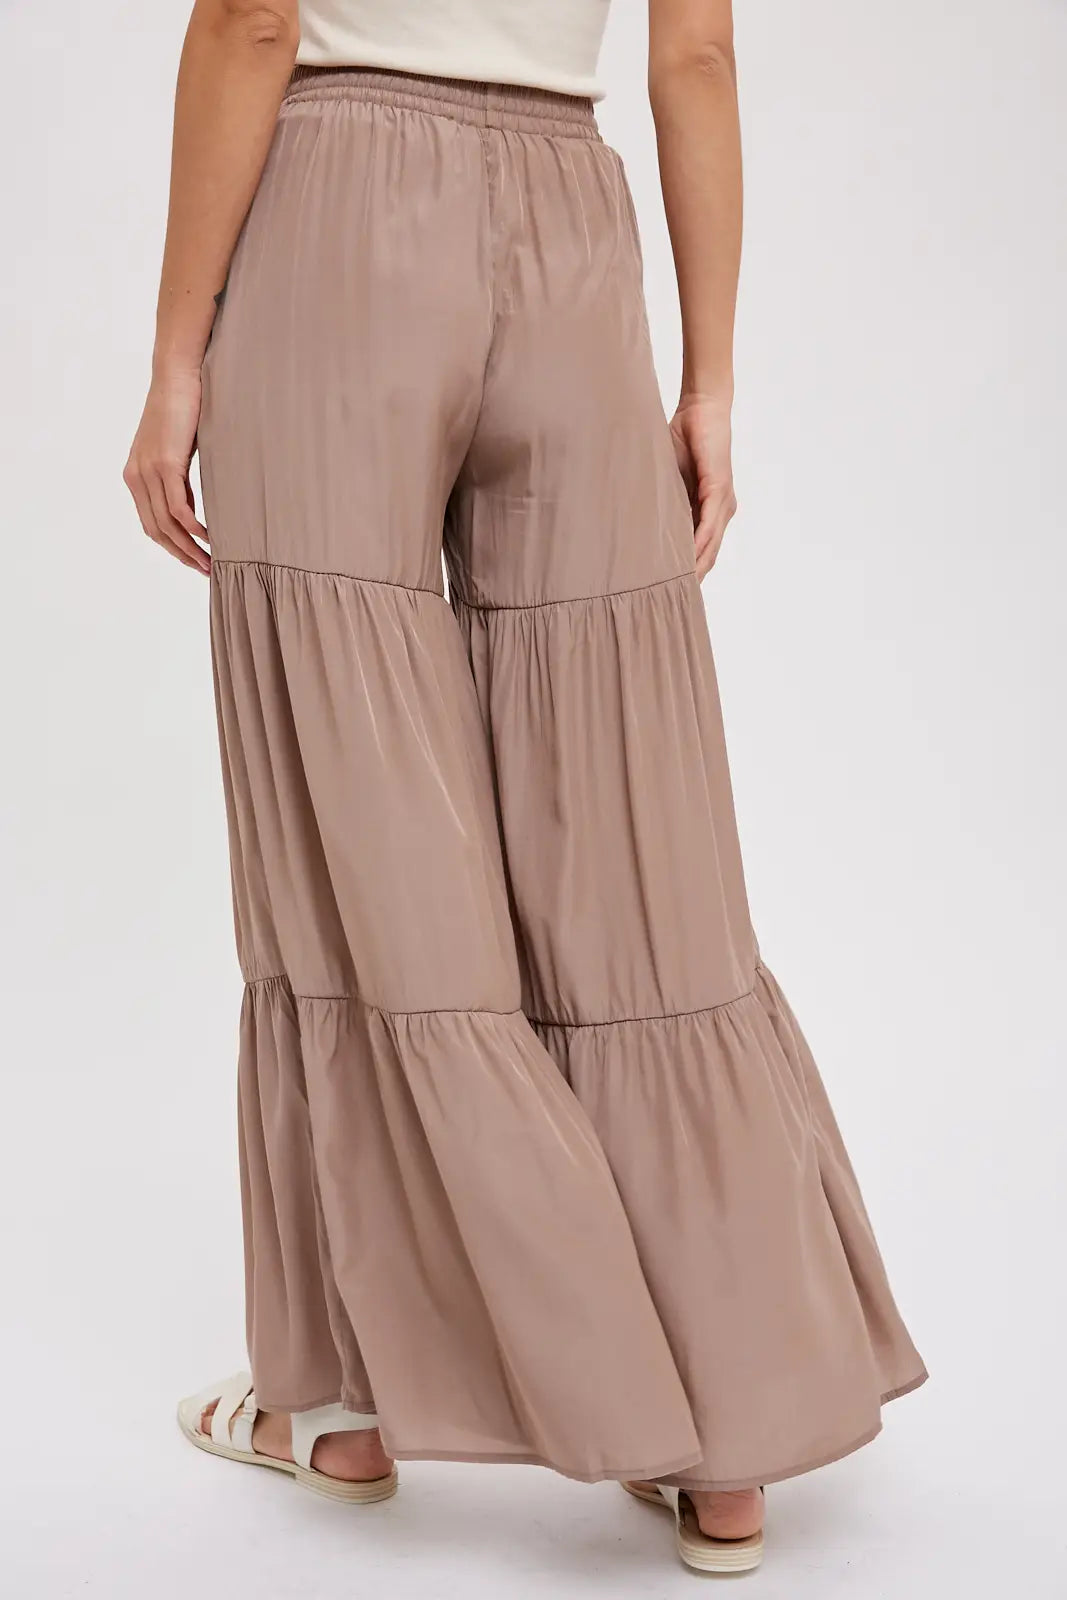 26 Types of Palazzo Pants for Relaxed & Trendy Look - LooksGud.com | Type  of pants, Pants, Outfits